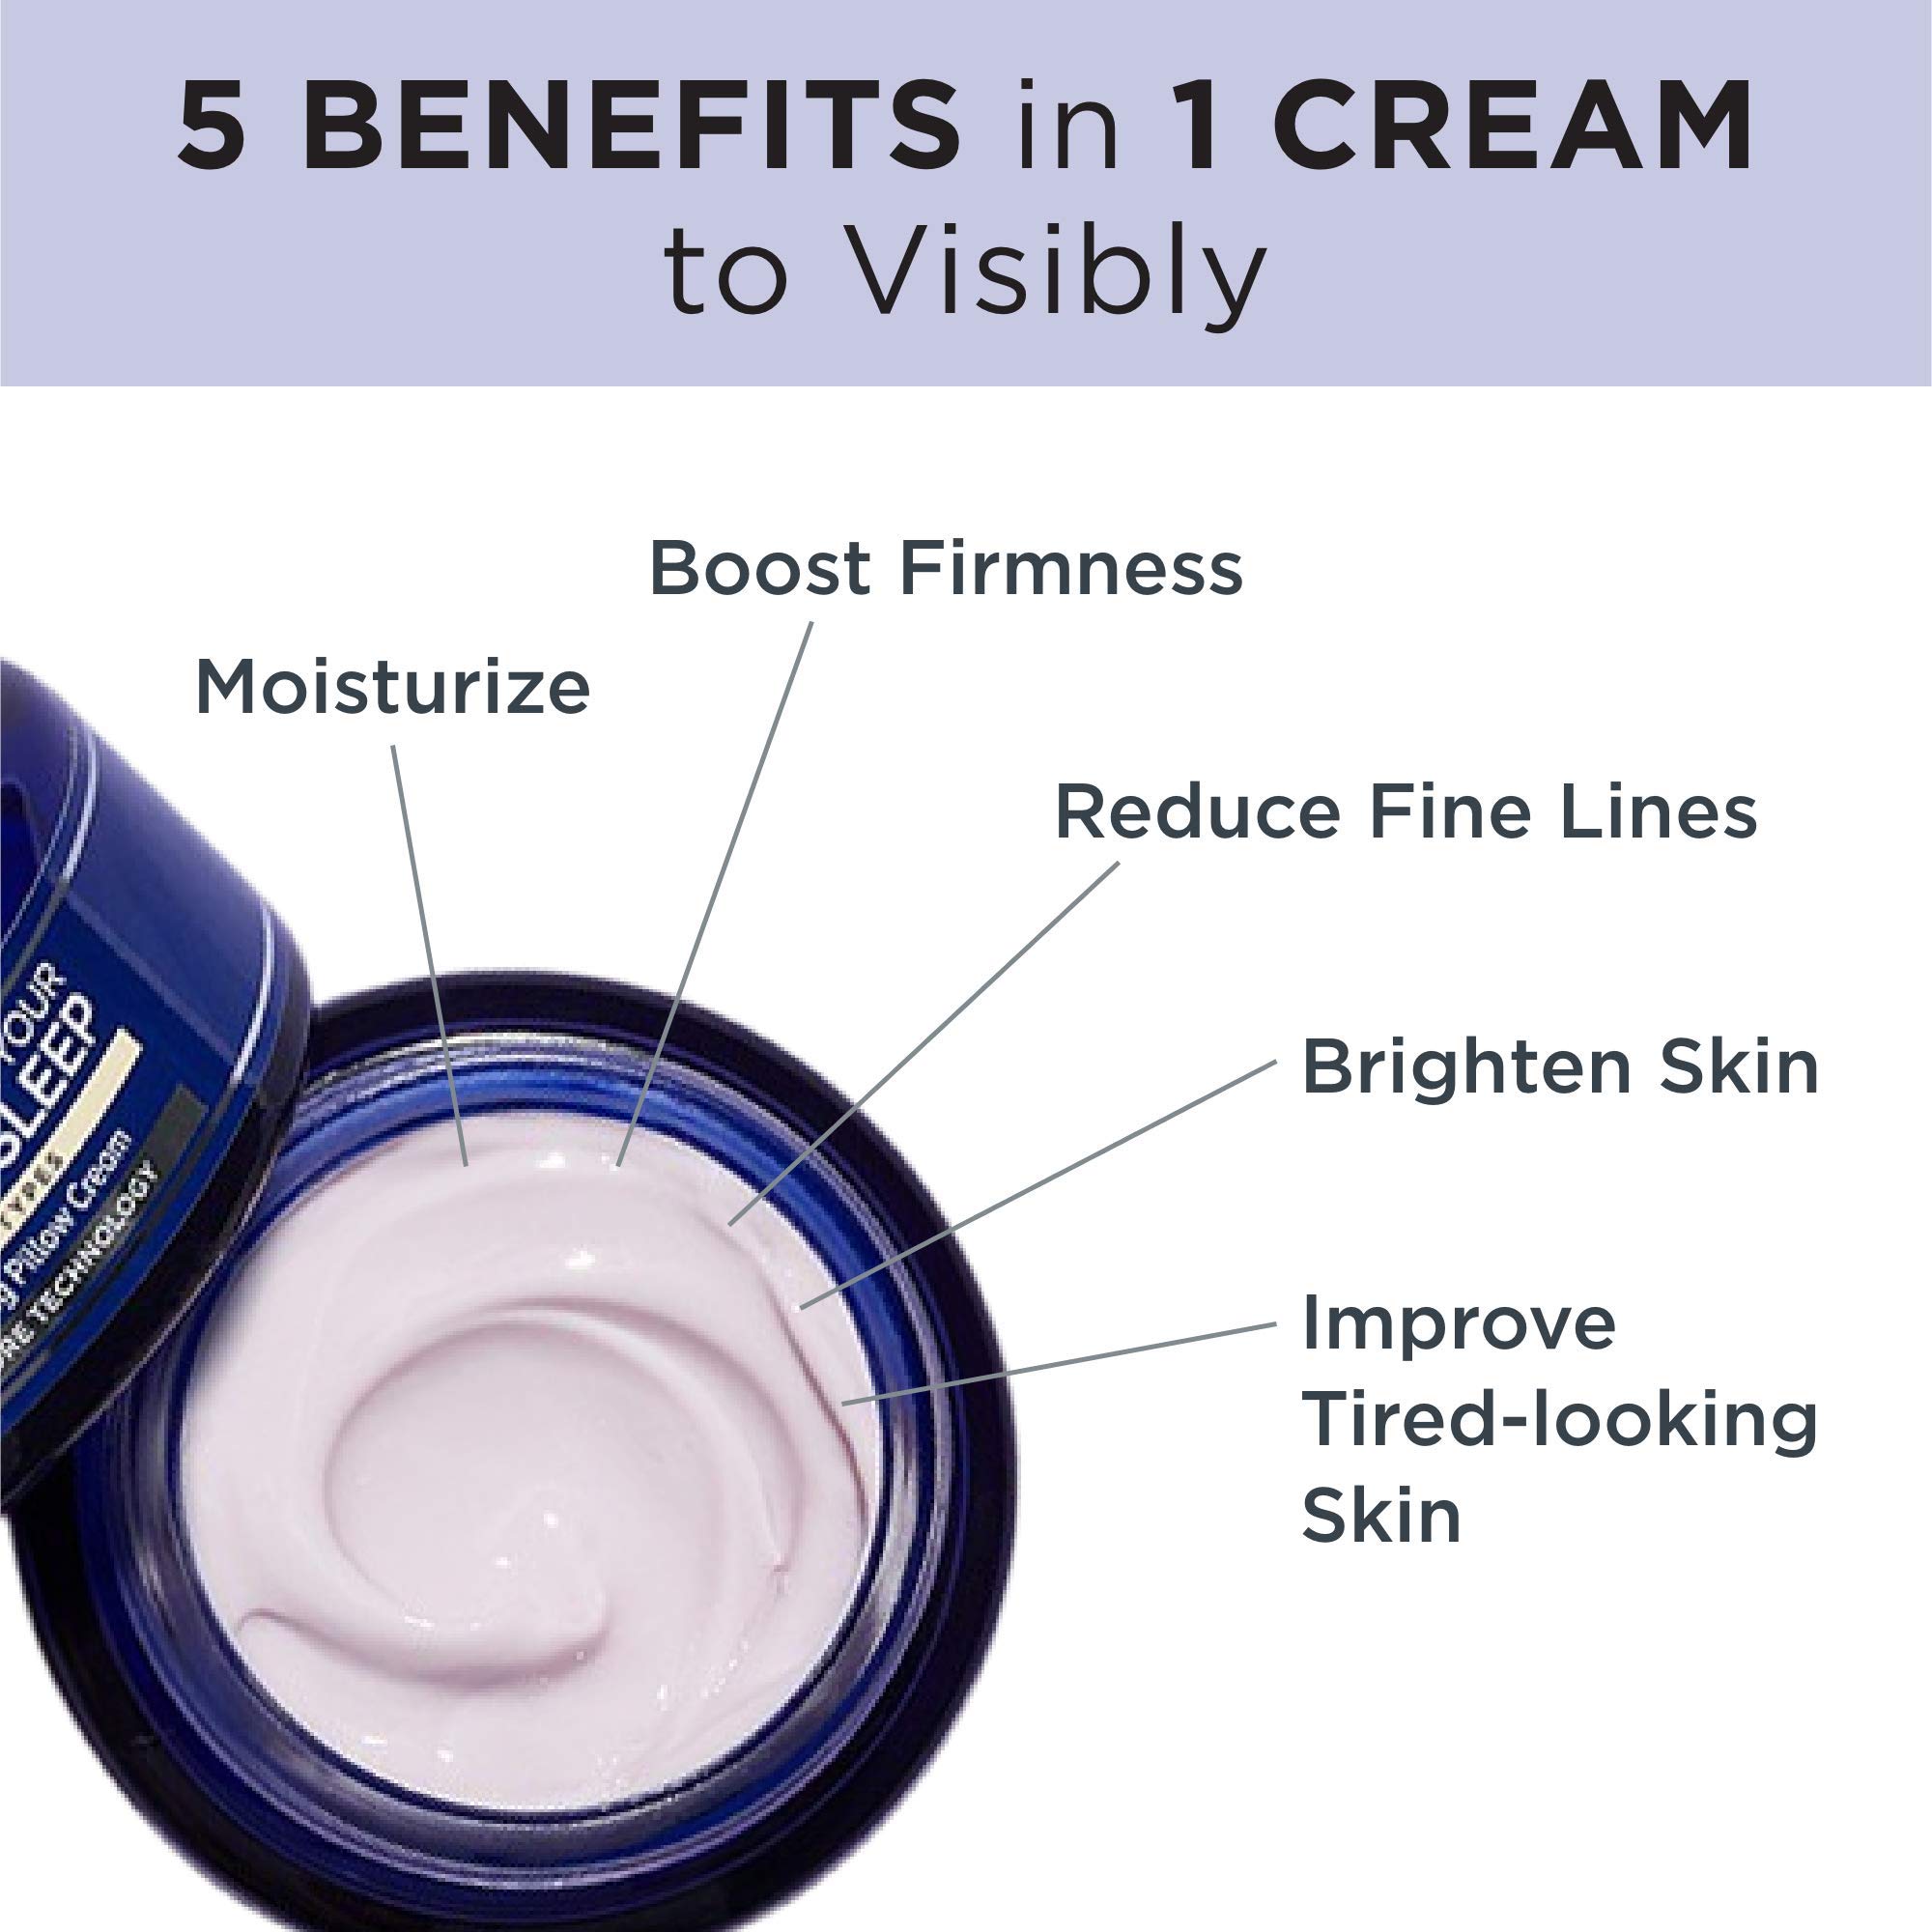 IT Cosmetics Confidence in Your Beauty Sleep Night Cream - Visibly Improves Fine Lines, Wrinkles, Dryness, Dullness & Loss of Firmness - With Hyaluronic Acid